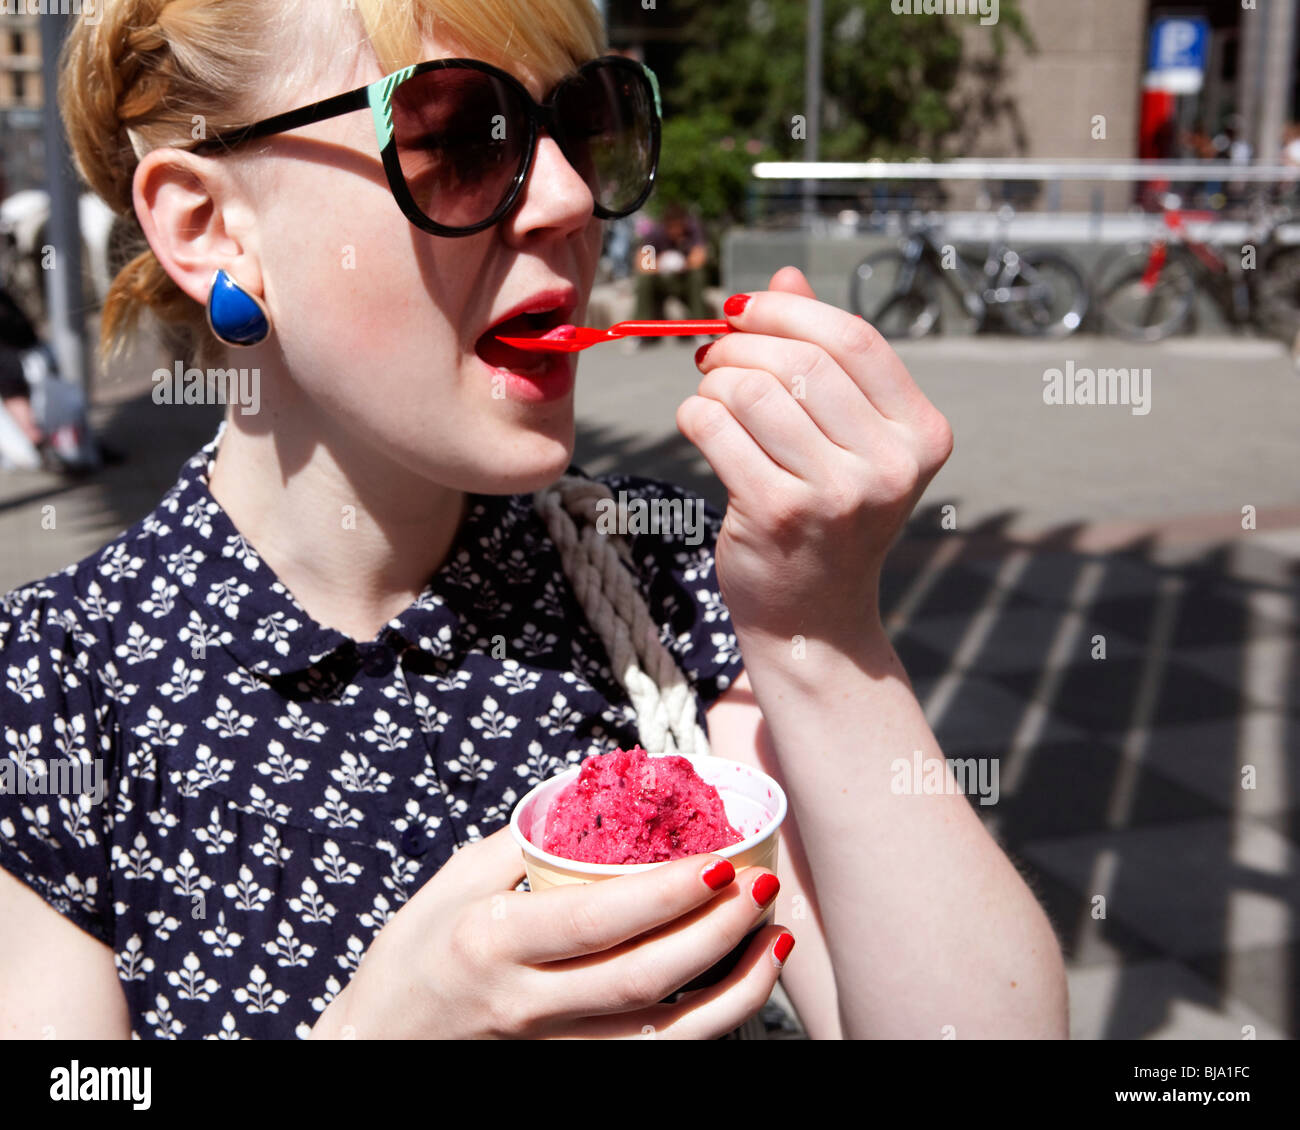 blonde girl in funky sunnglasses eating pink ice cream on the street Stock Photo